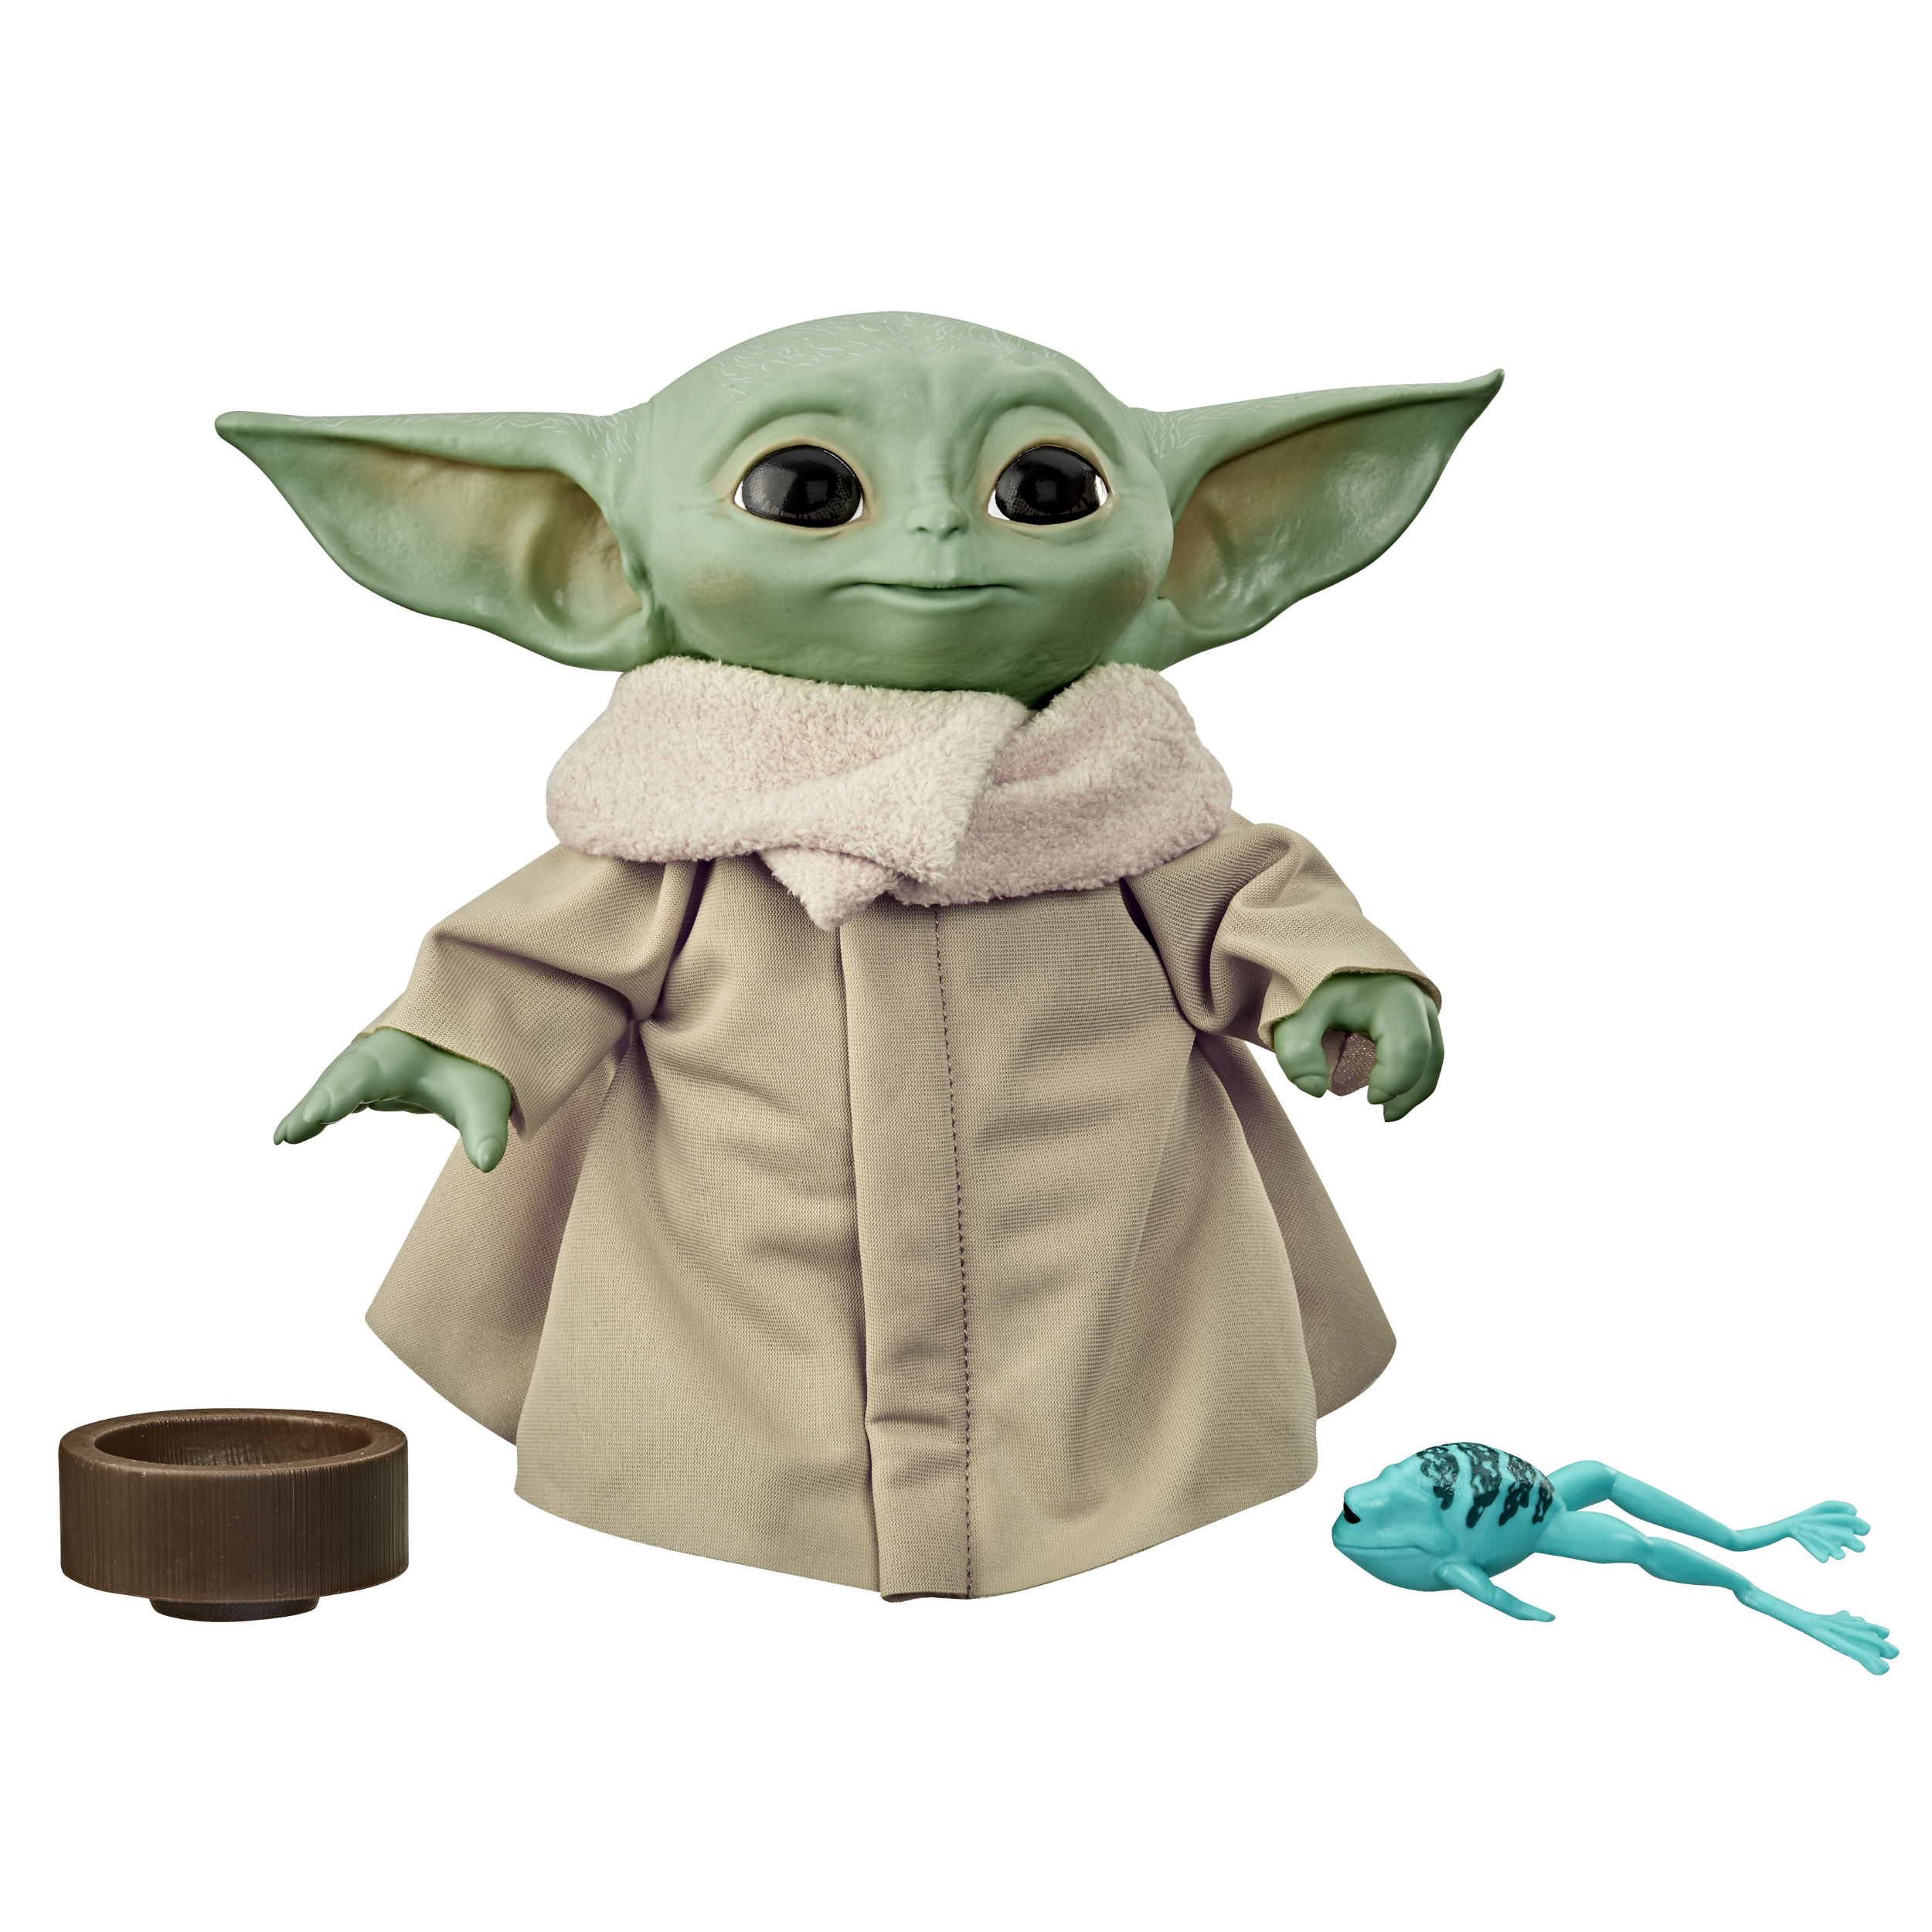 APPYTOYS  Star Wars The Child Talking Plush Toy with Sounds